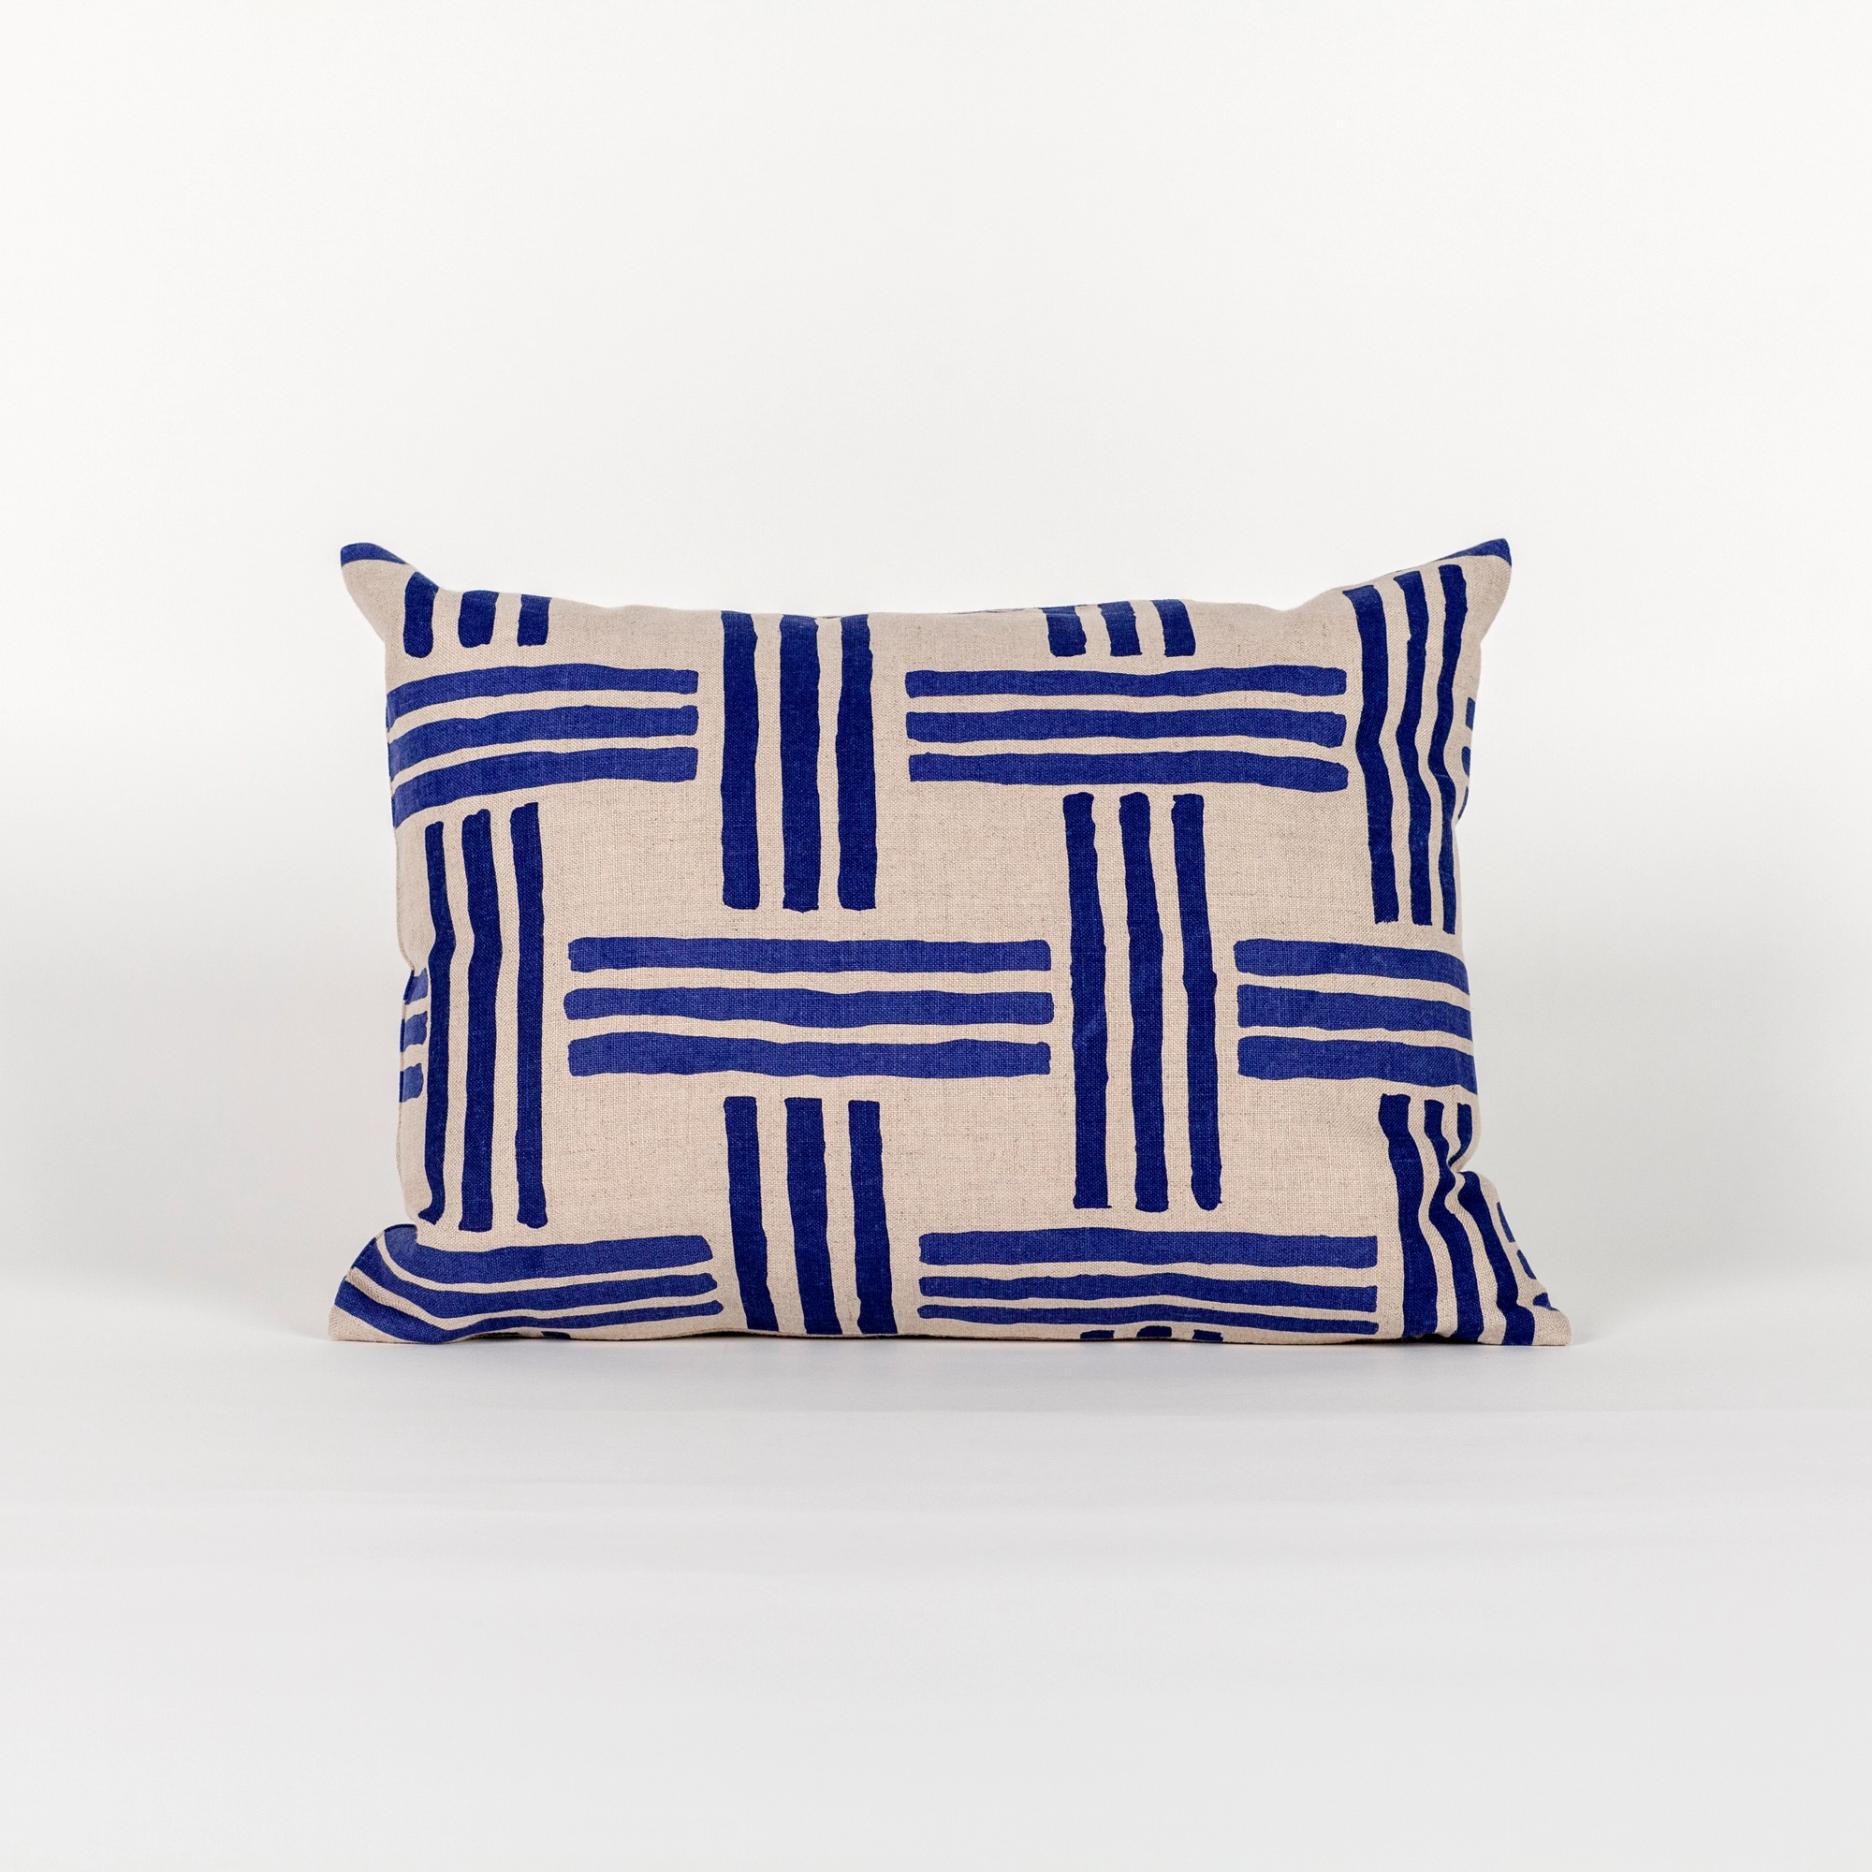 A wide rectangular pillow made of light brown fabric with a minimal weave-like pattern of blue stripes in groups of 3